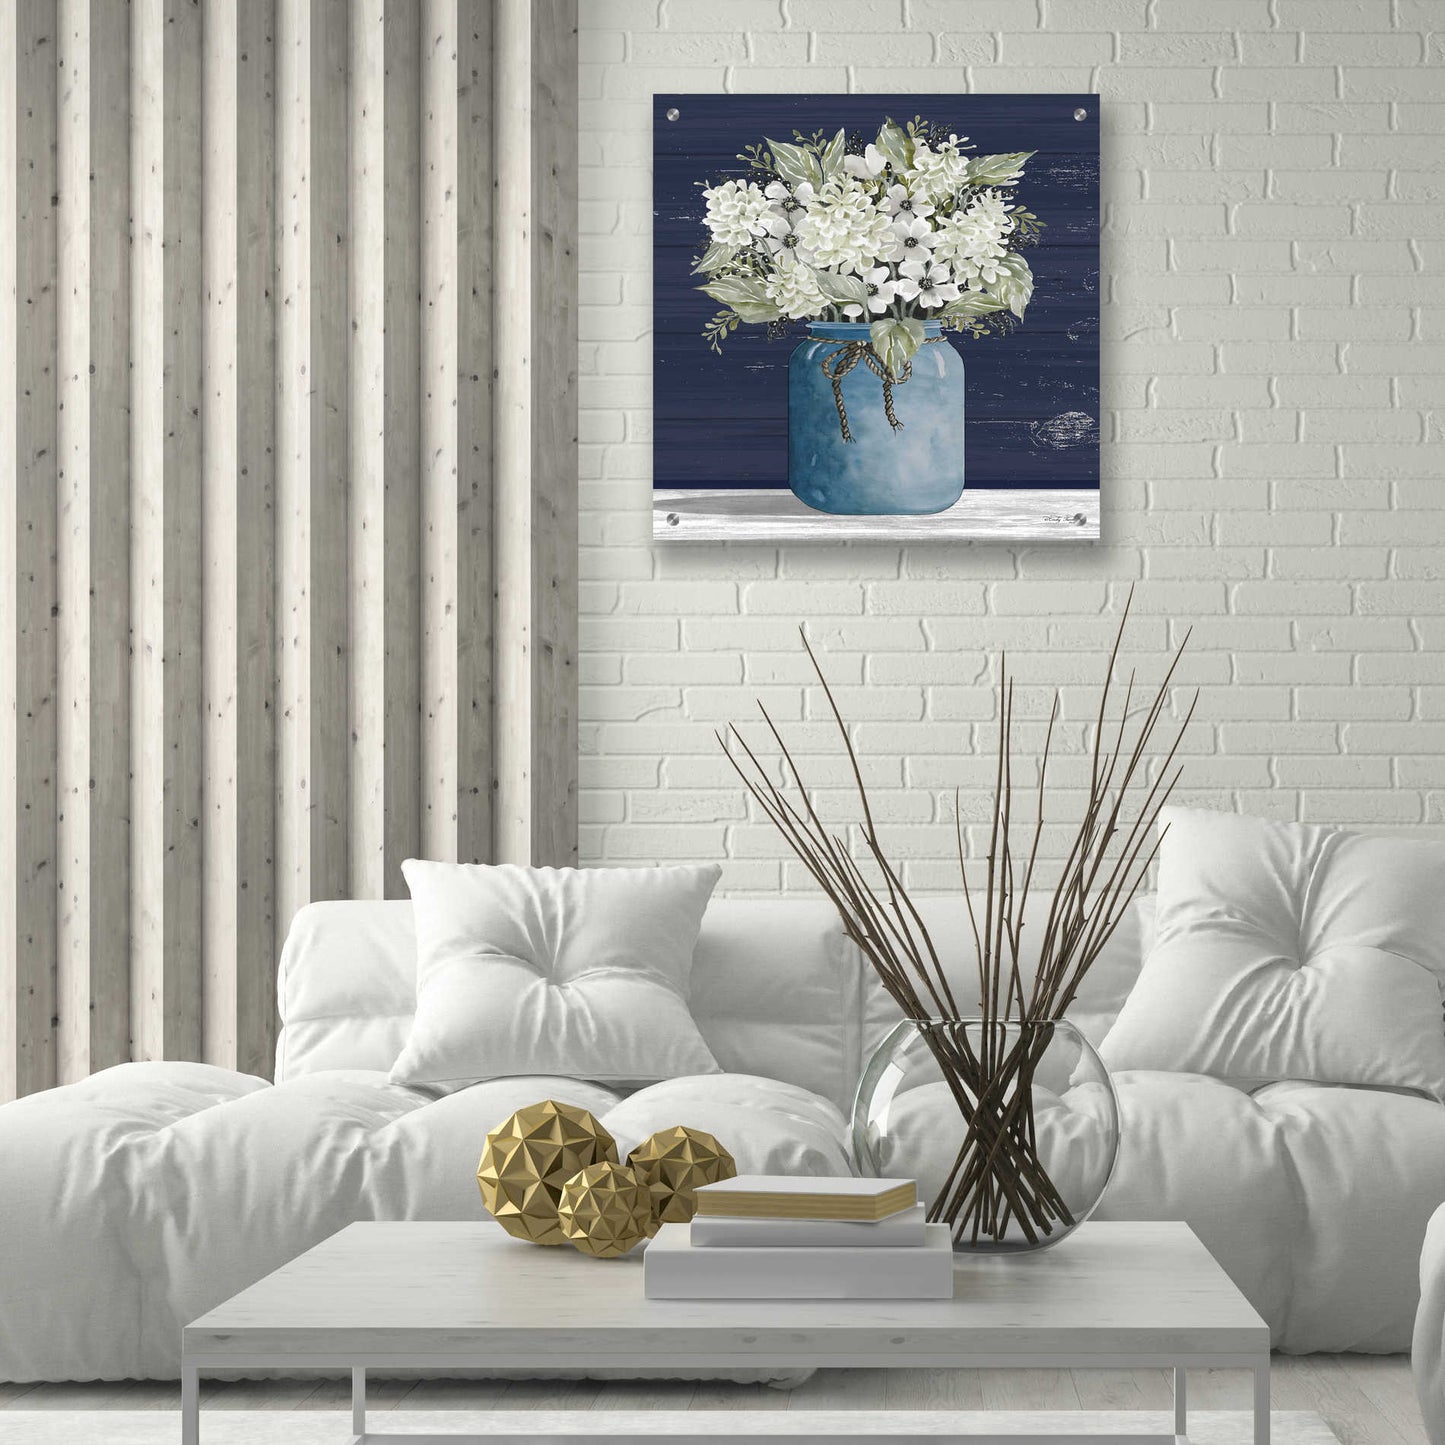 Epic Art 'White Flowers I' by Cindy Jacobs, Acrylic Glass Wall Art,24x24